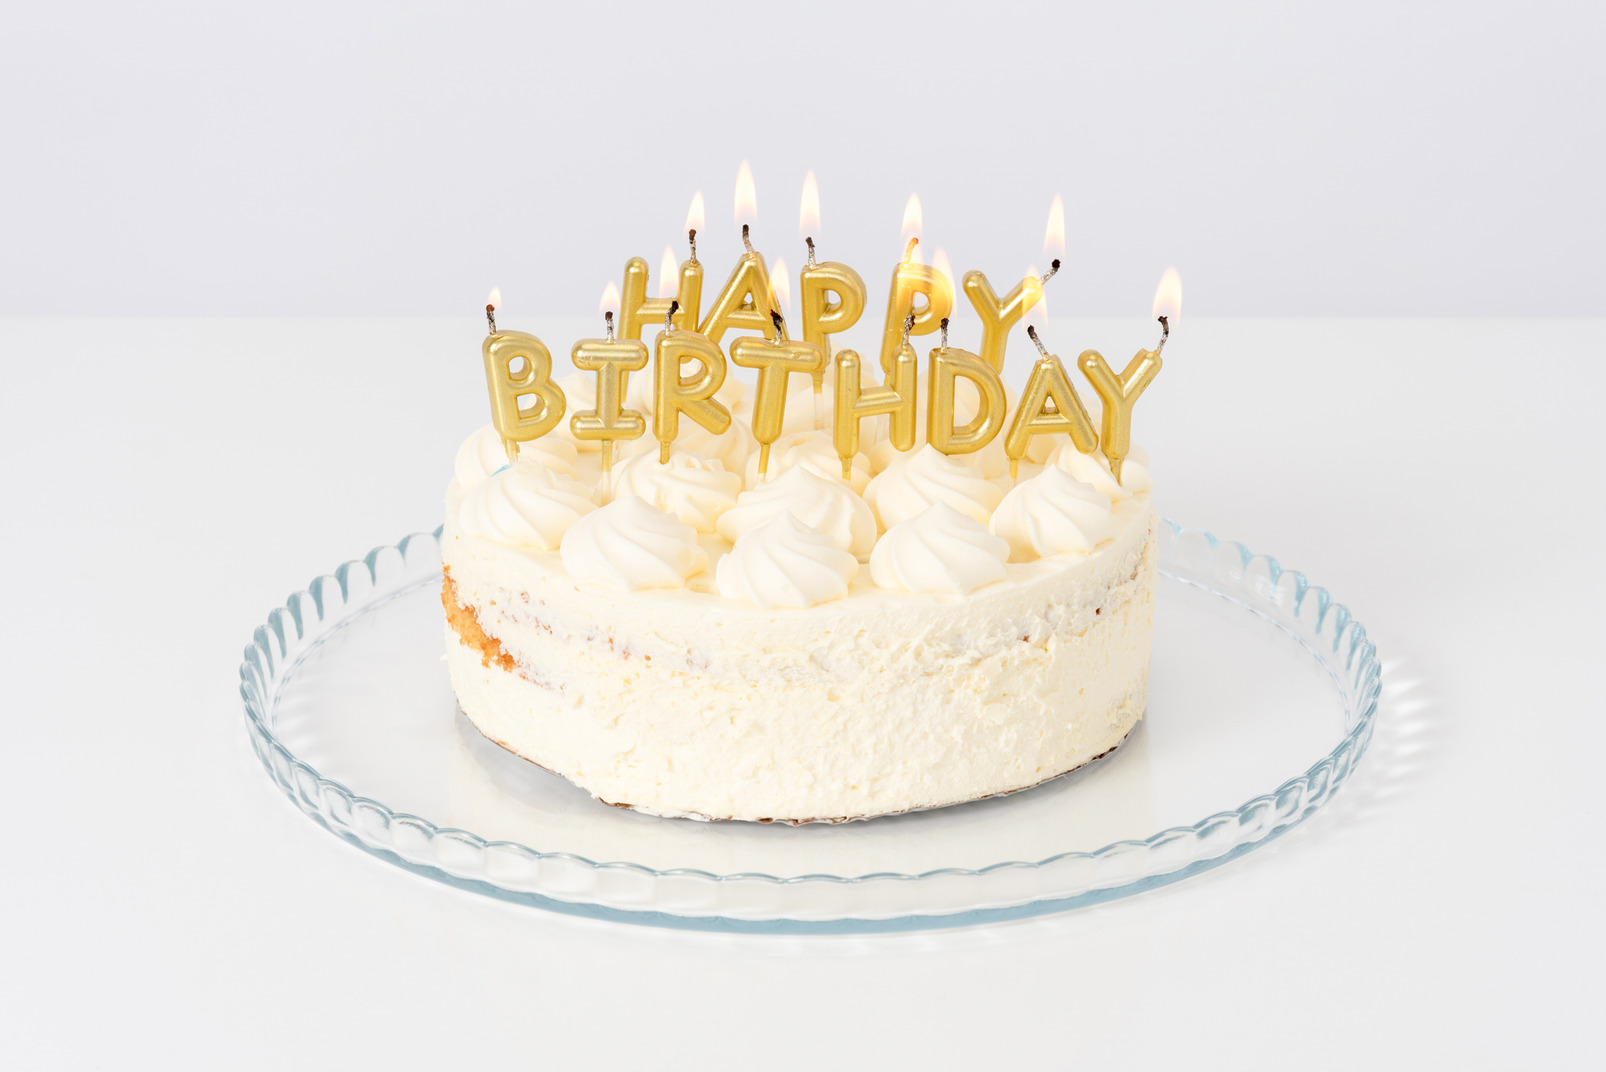 White cake with candles on a glass plate